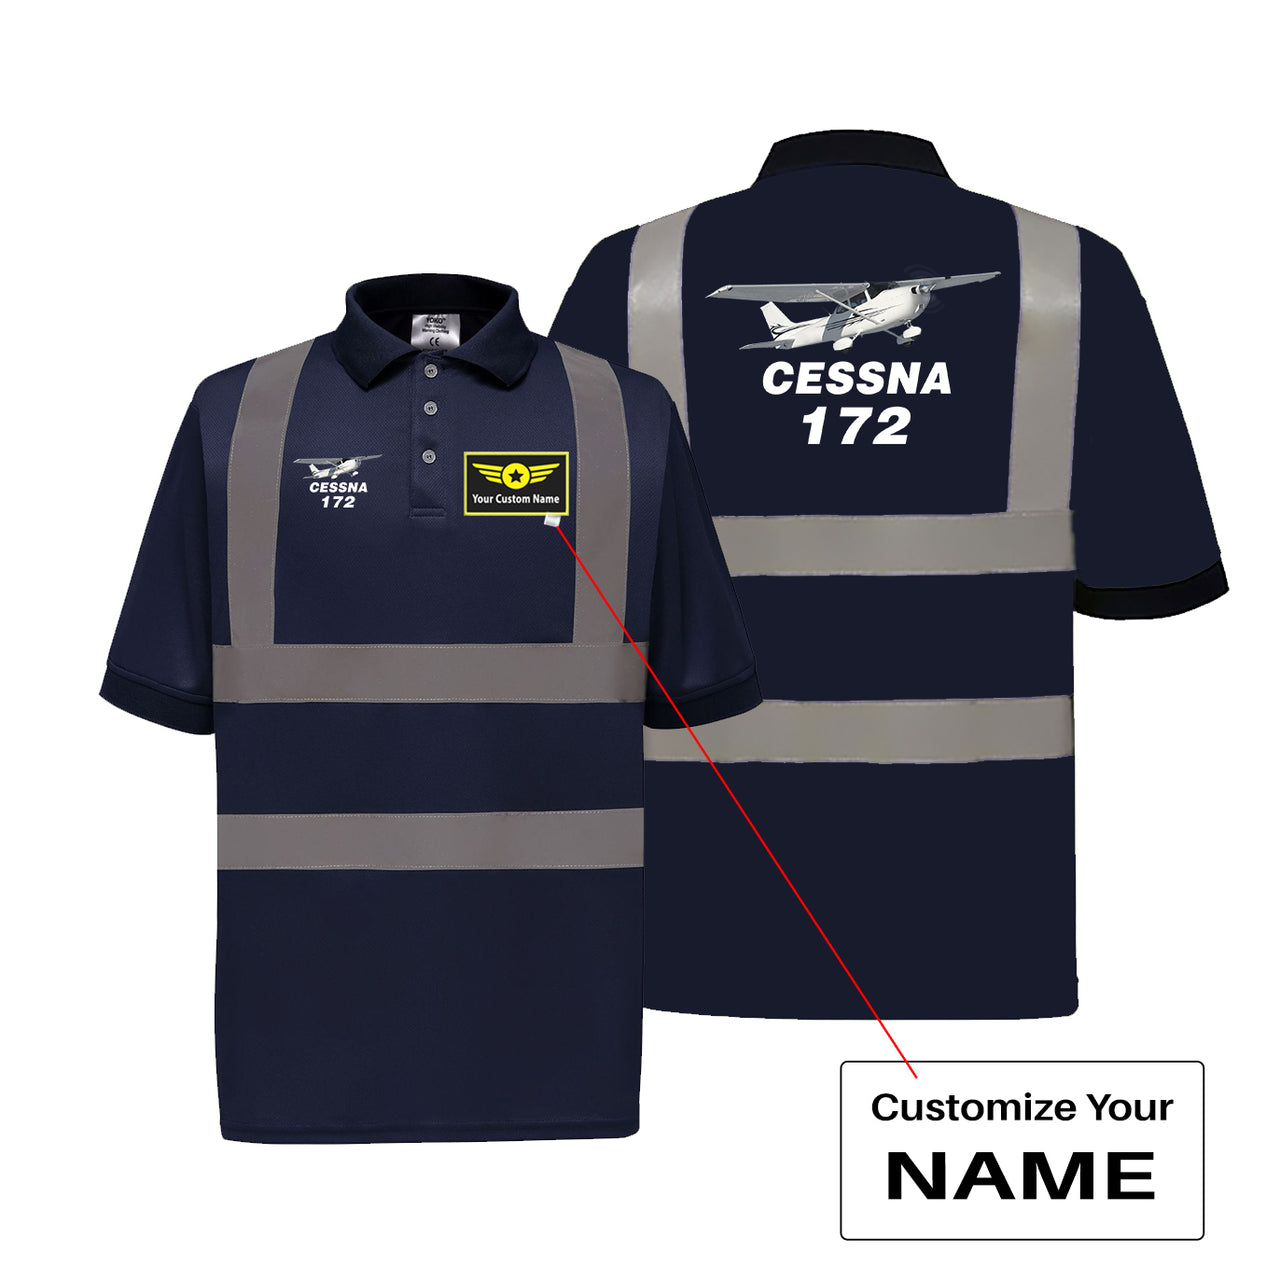 The Cessna 172 Designed Reflective Polo T-Shirts